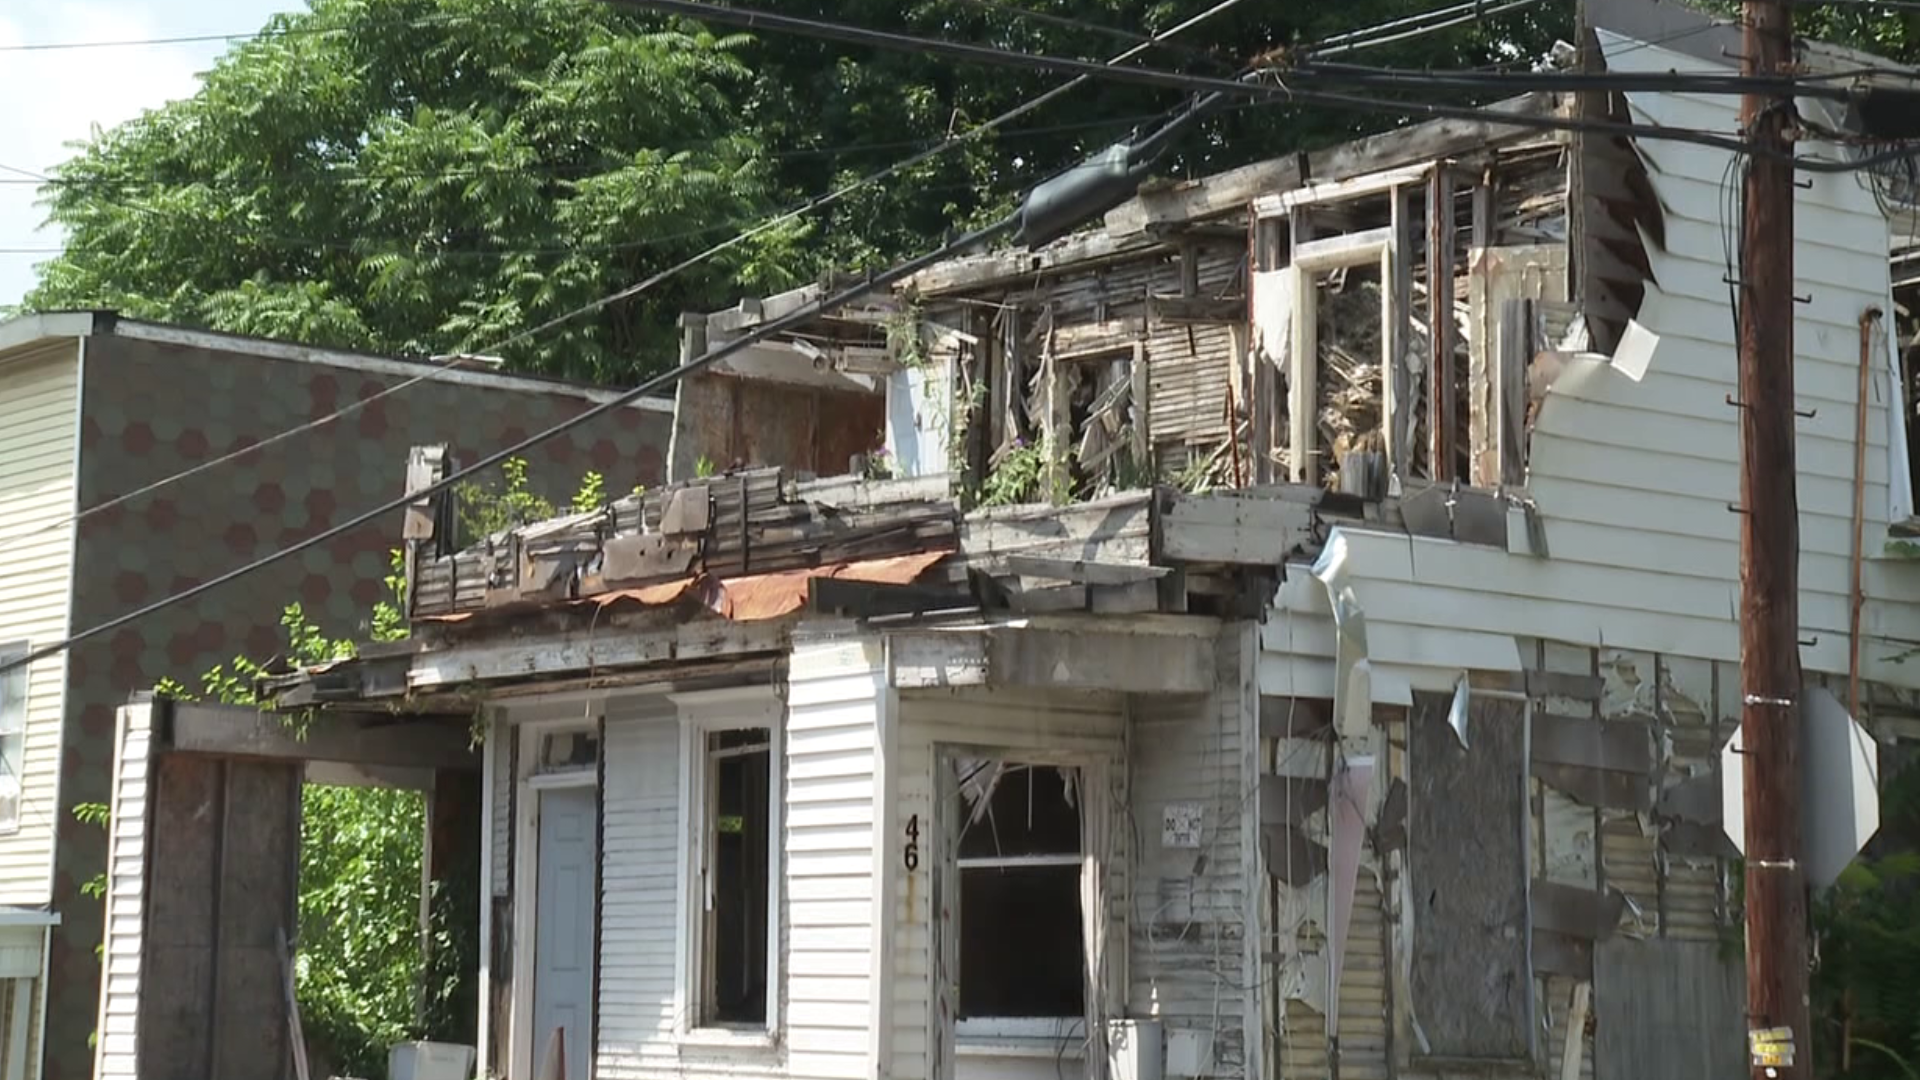 Pottsville officials have a new tool to help them clean up their city. Changes to a local ordinance mean a crackdown on blighted buildings.